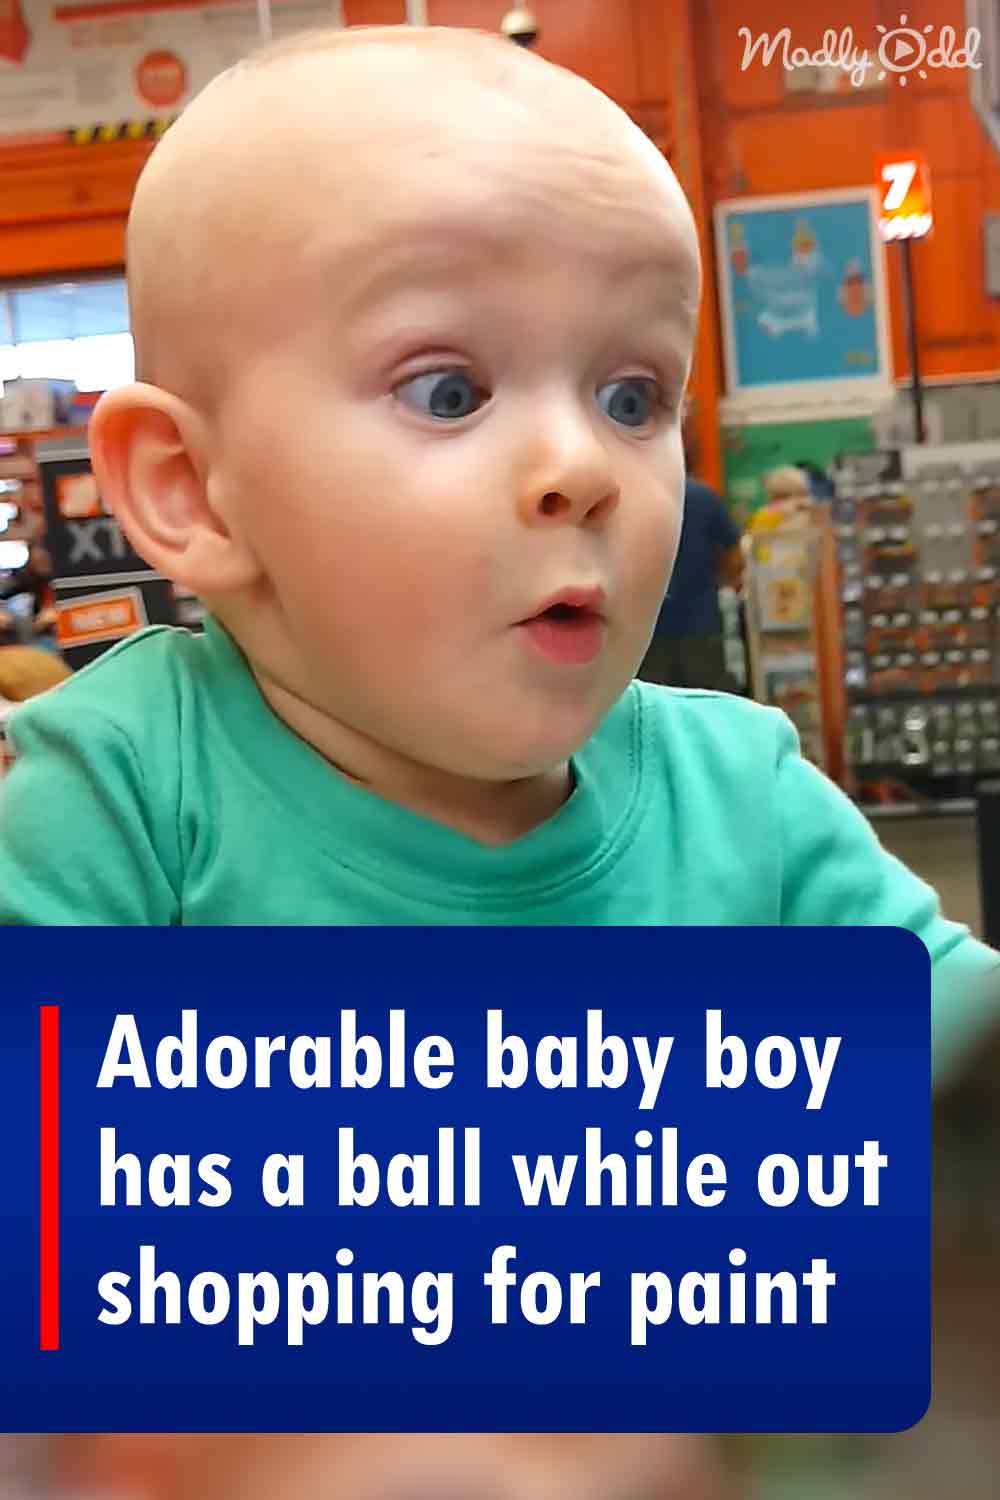 Adorable baby boy has a ball while out shopping for paint